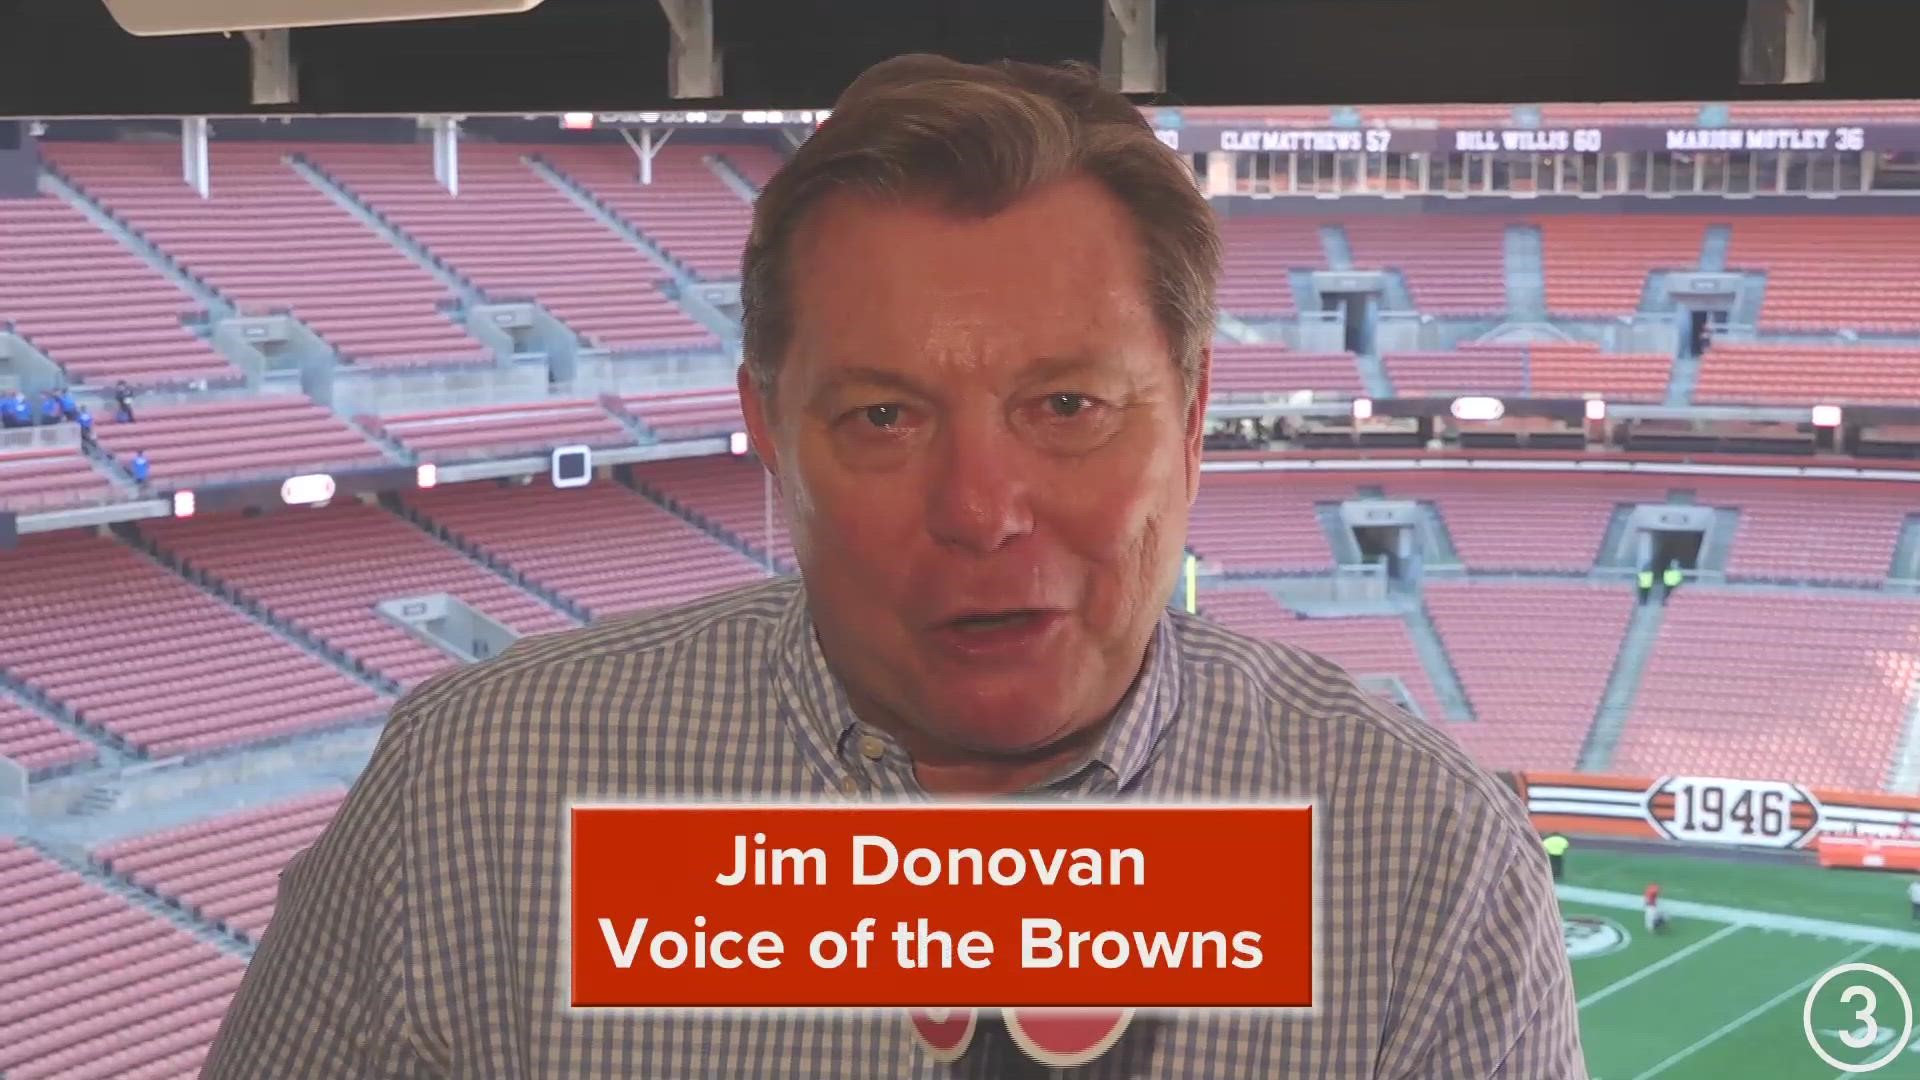 Voice of the Browns Jim Donovan recaps the Cleveland Browns win over the Houston Texans.